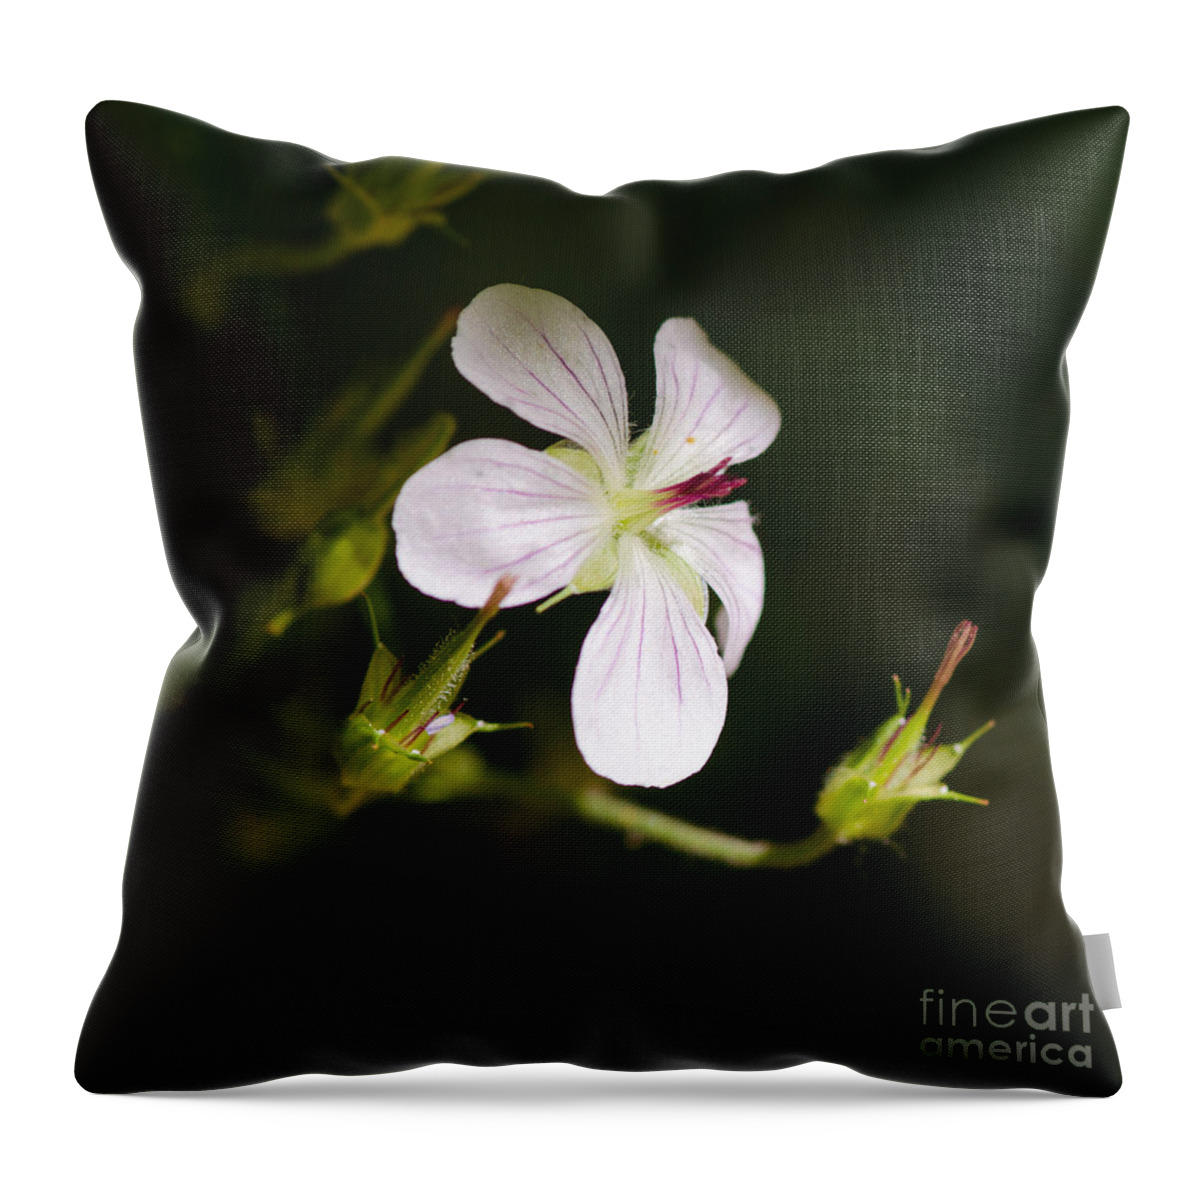 Macro Throw Pillow featuring the photograph In The Limelight by Tamara Becker